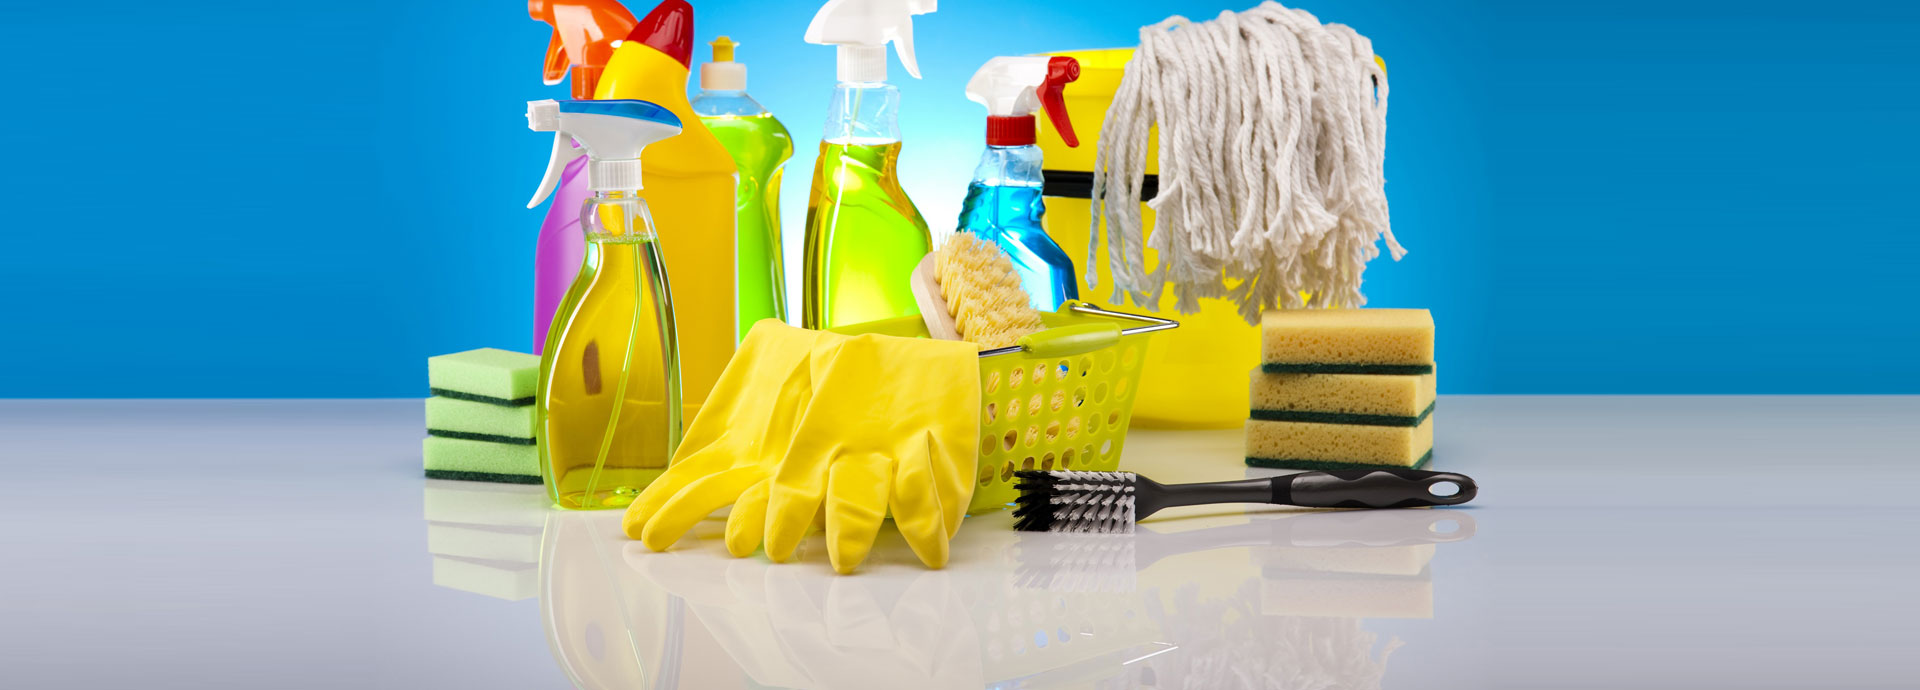 Scrub & Surf Cleaning Services